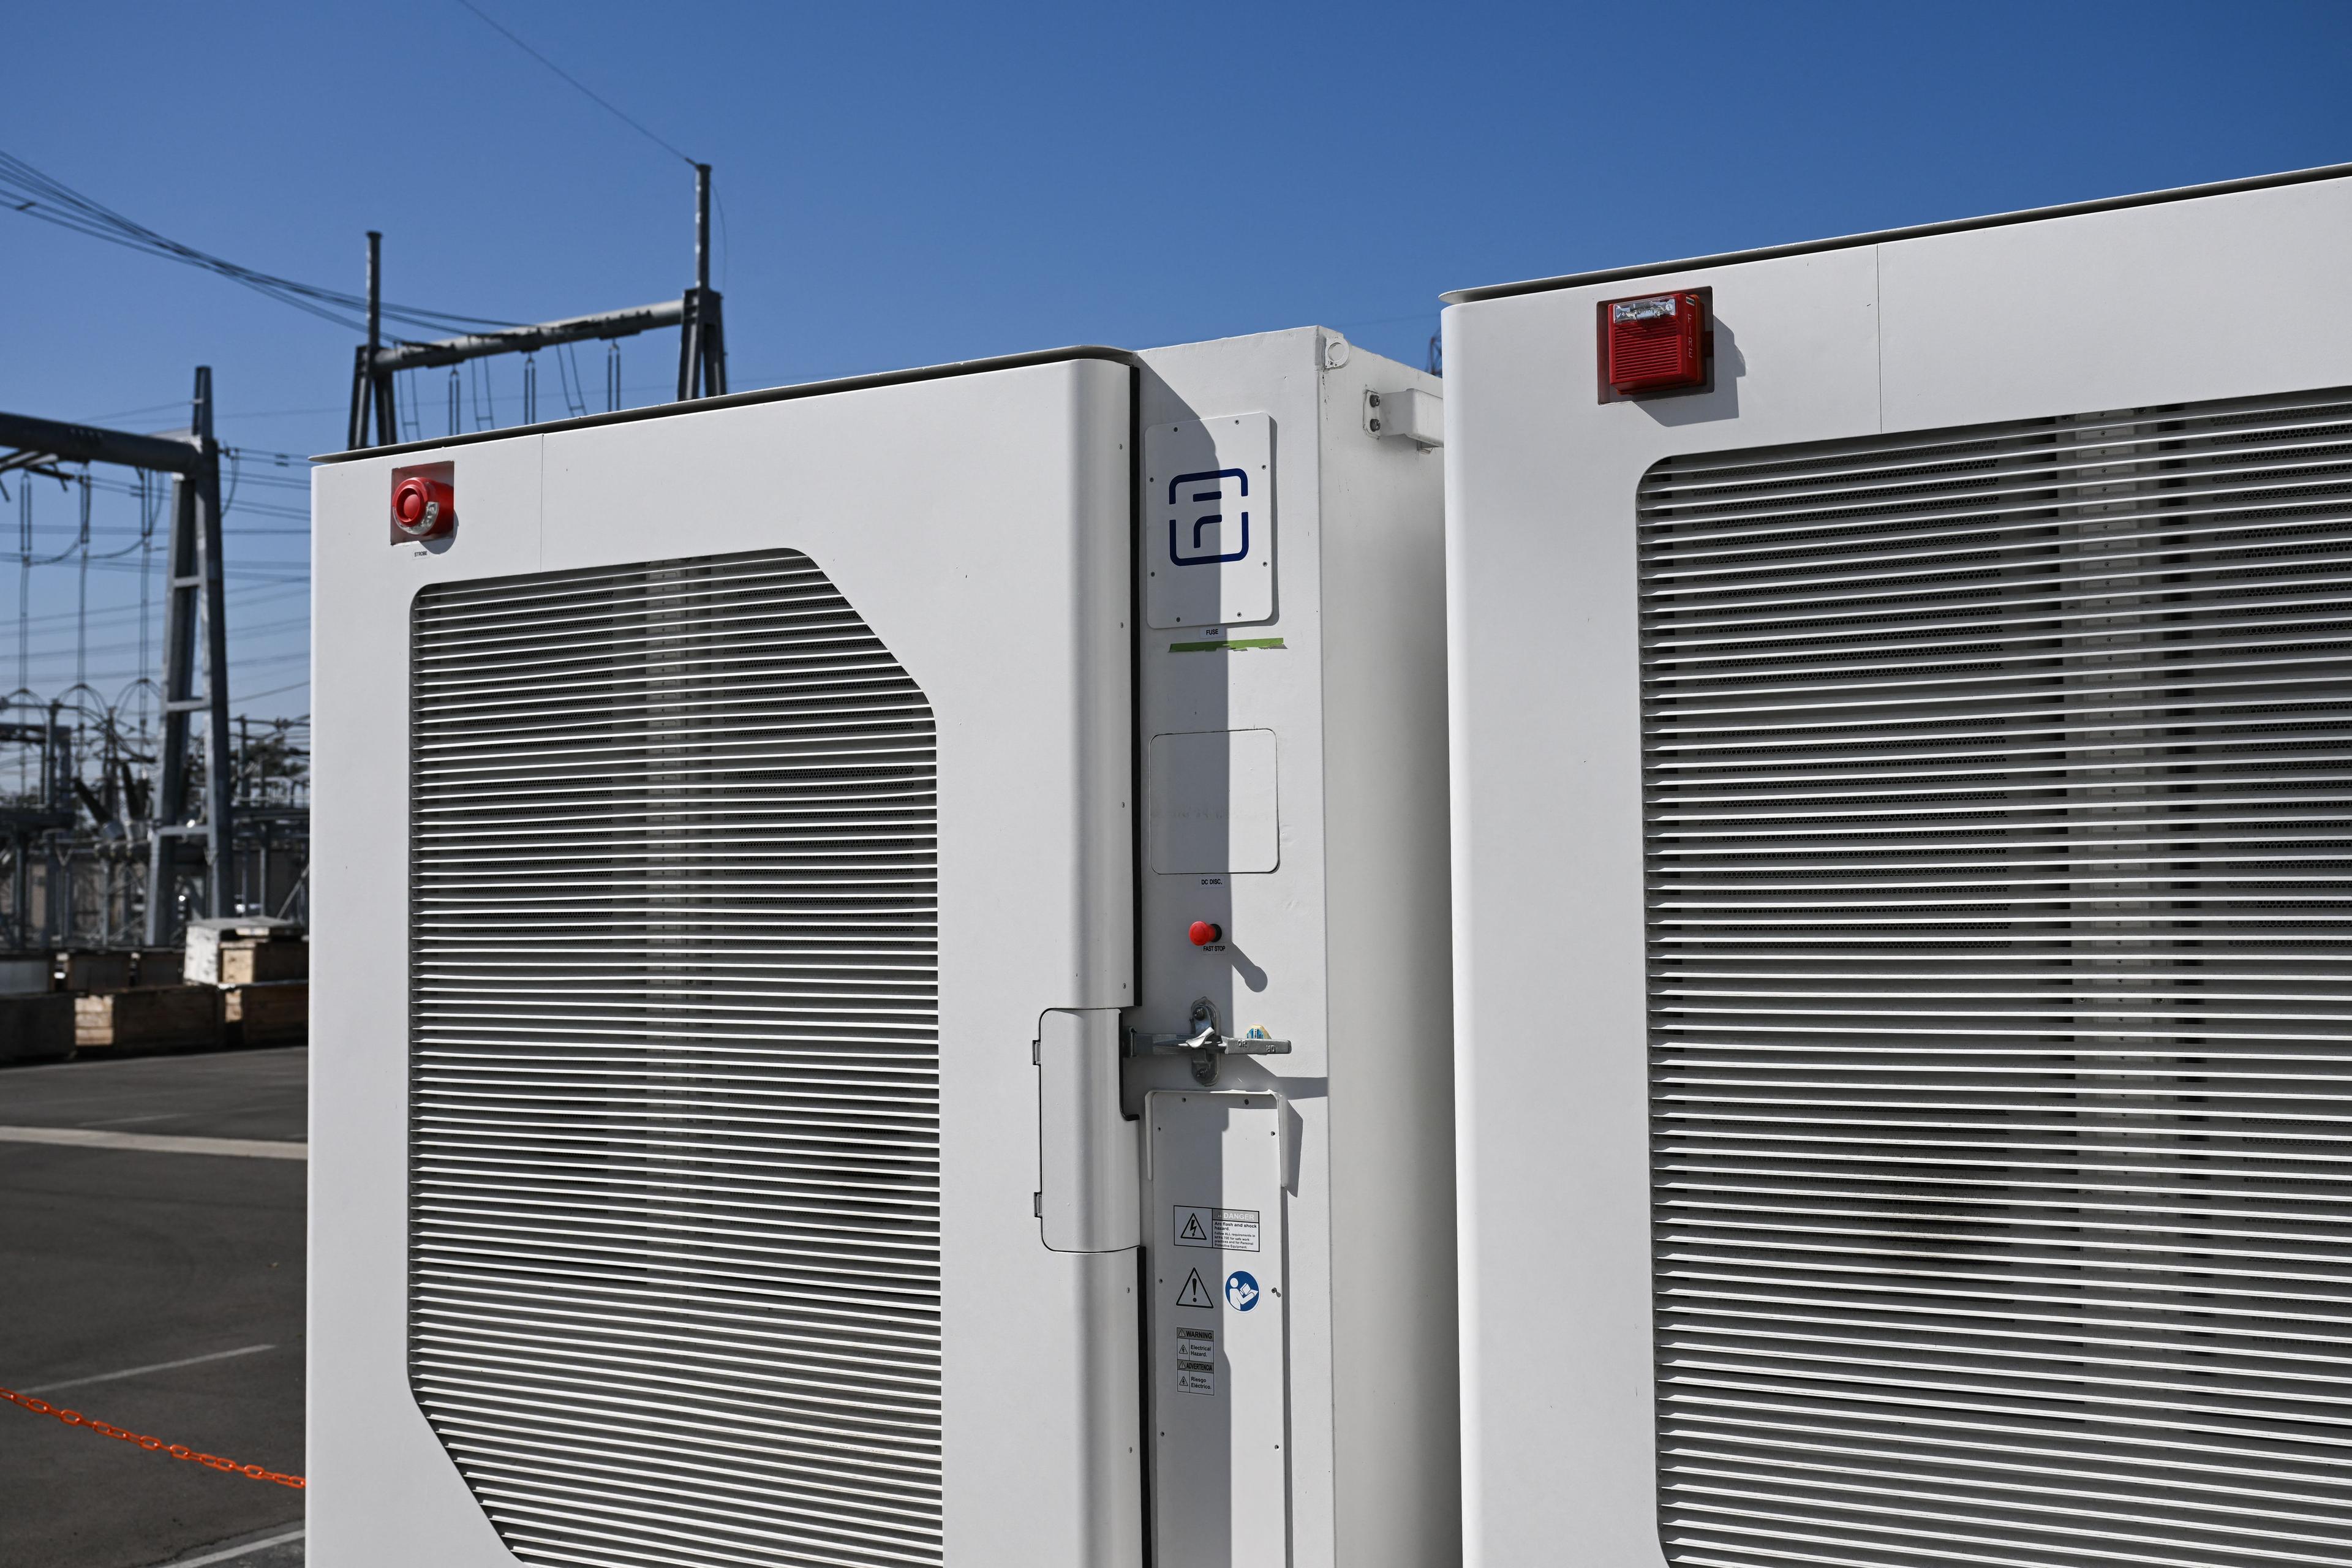 California Boosts Battery Storage Capacity by 757 Percent in 4 Years